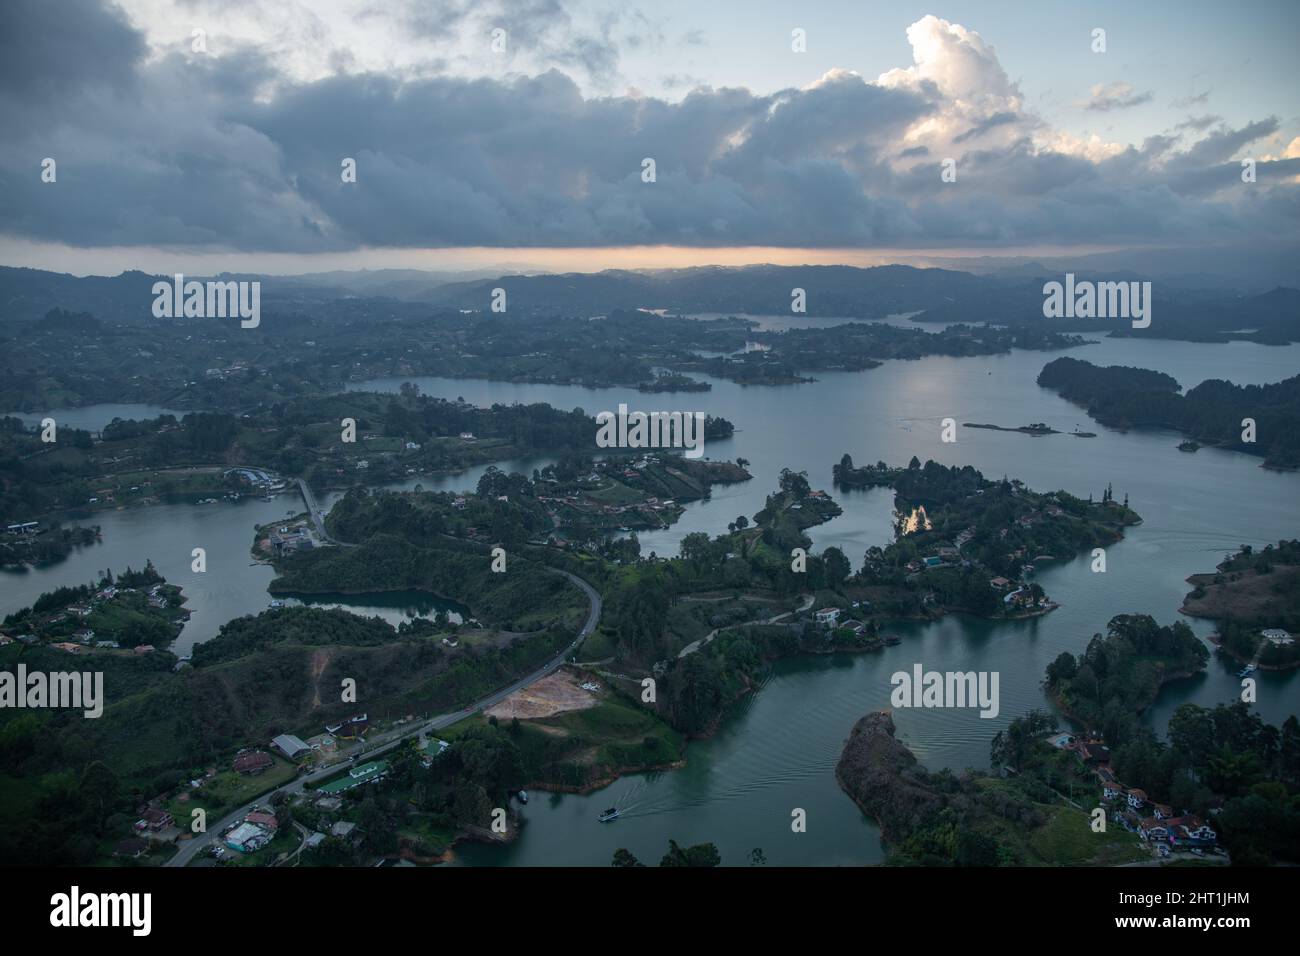 A view from the top of El Penon de Guatape / The Rock of Guatape in Colombia Stock Photo